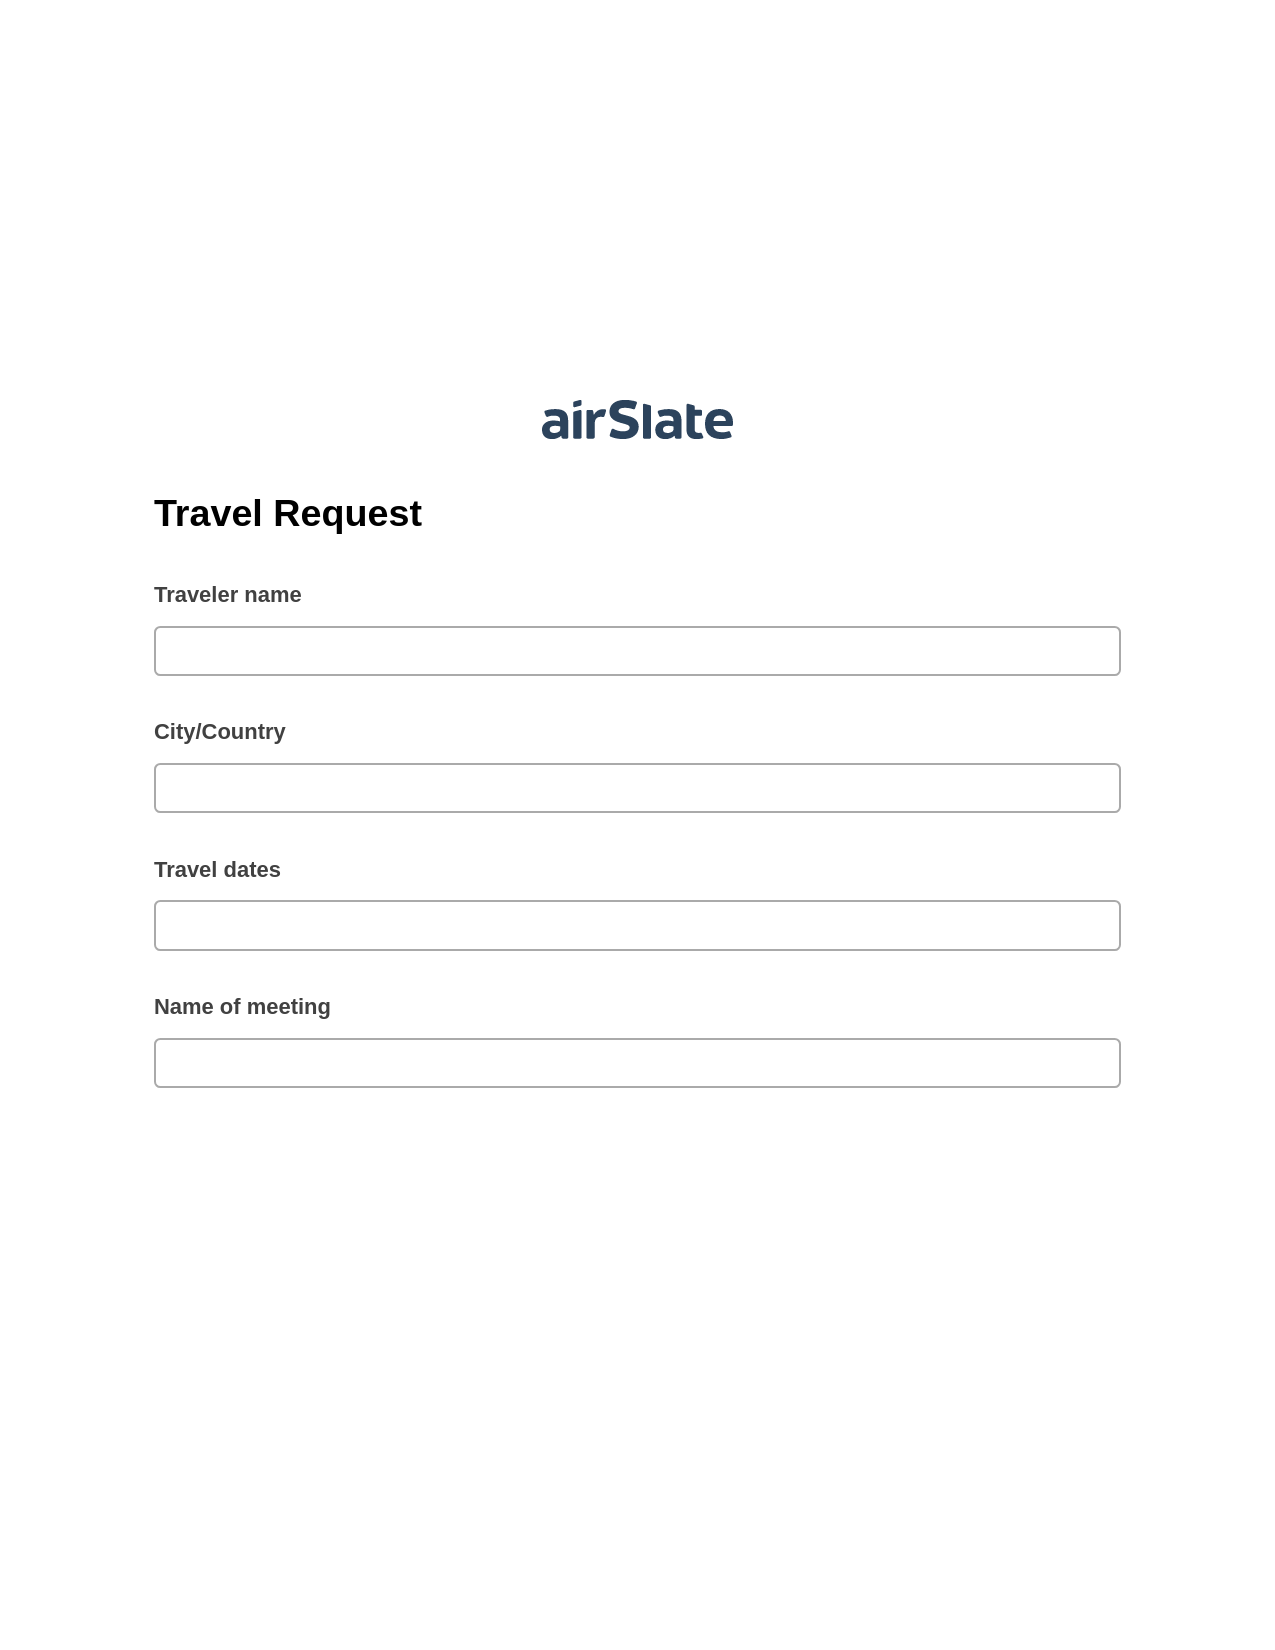 Travel Request Pre-fill from Salesforce Record Bot, Google Sheet Two-Way Binding Bot, Export to Excel 365 Bot